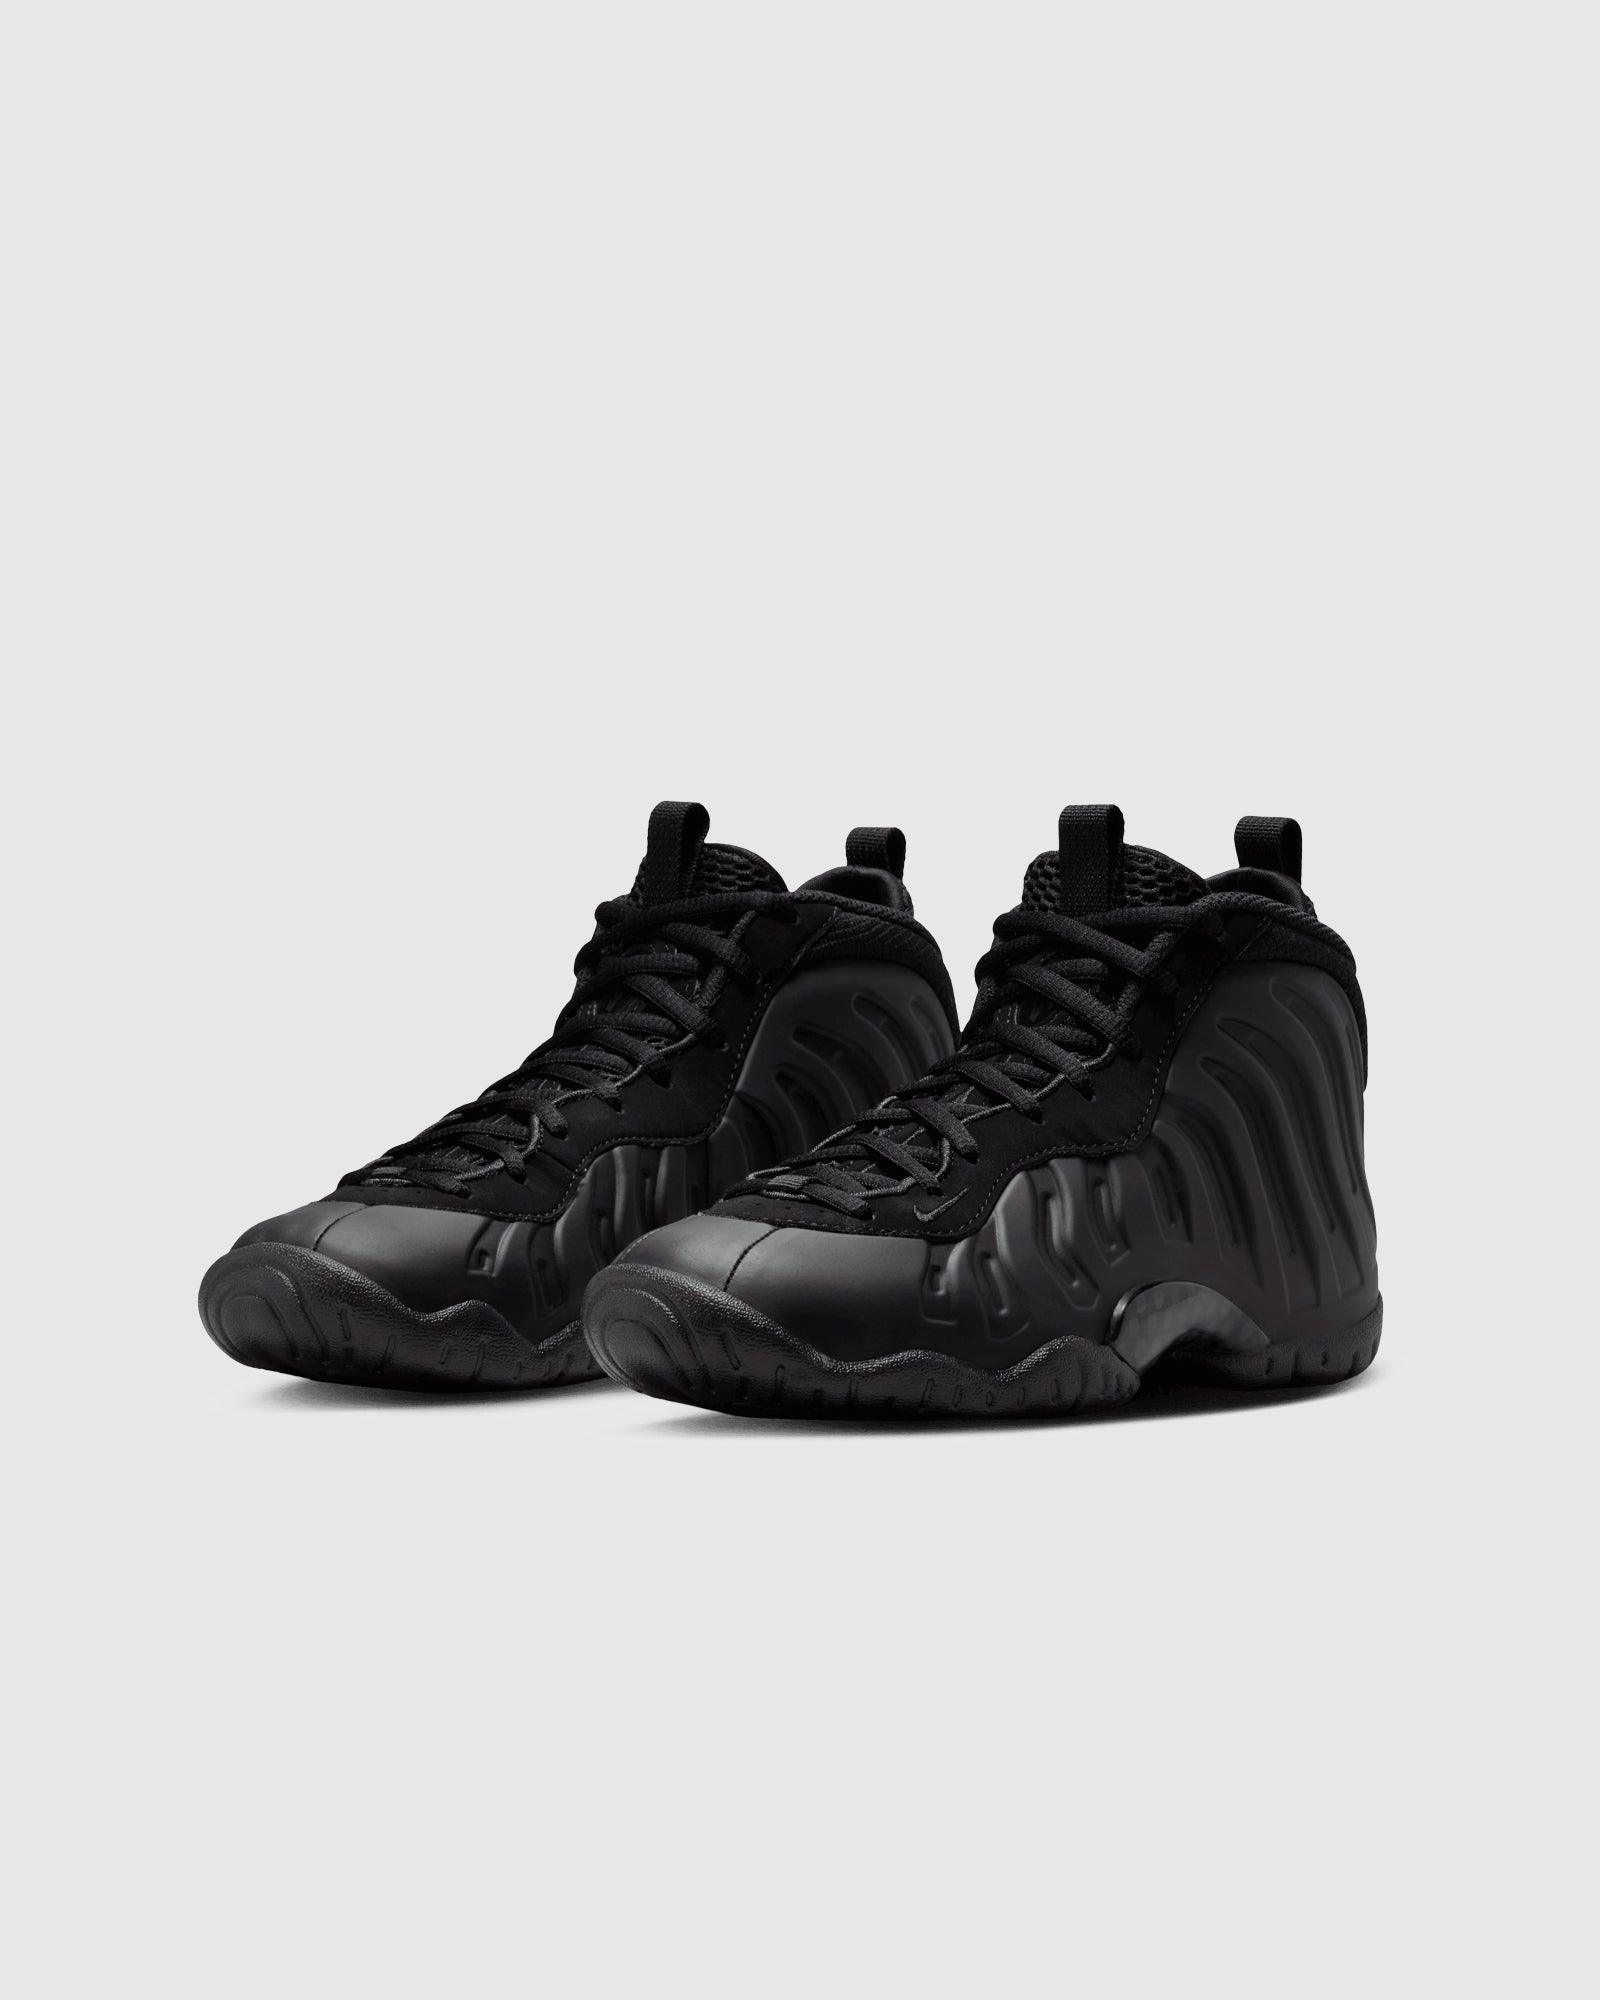 LITTLE POSITE ONE "ANTHRACITE"